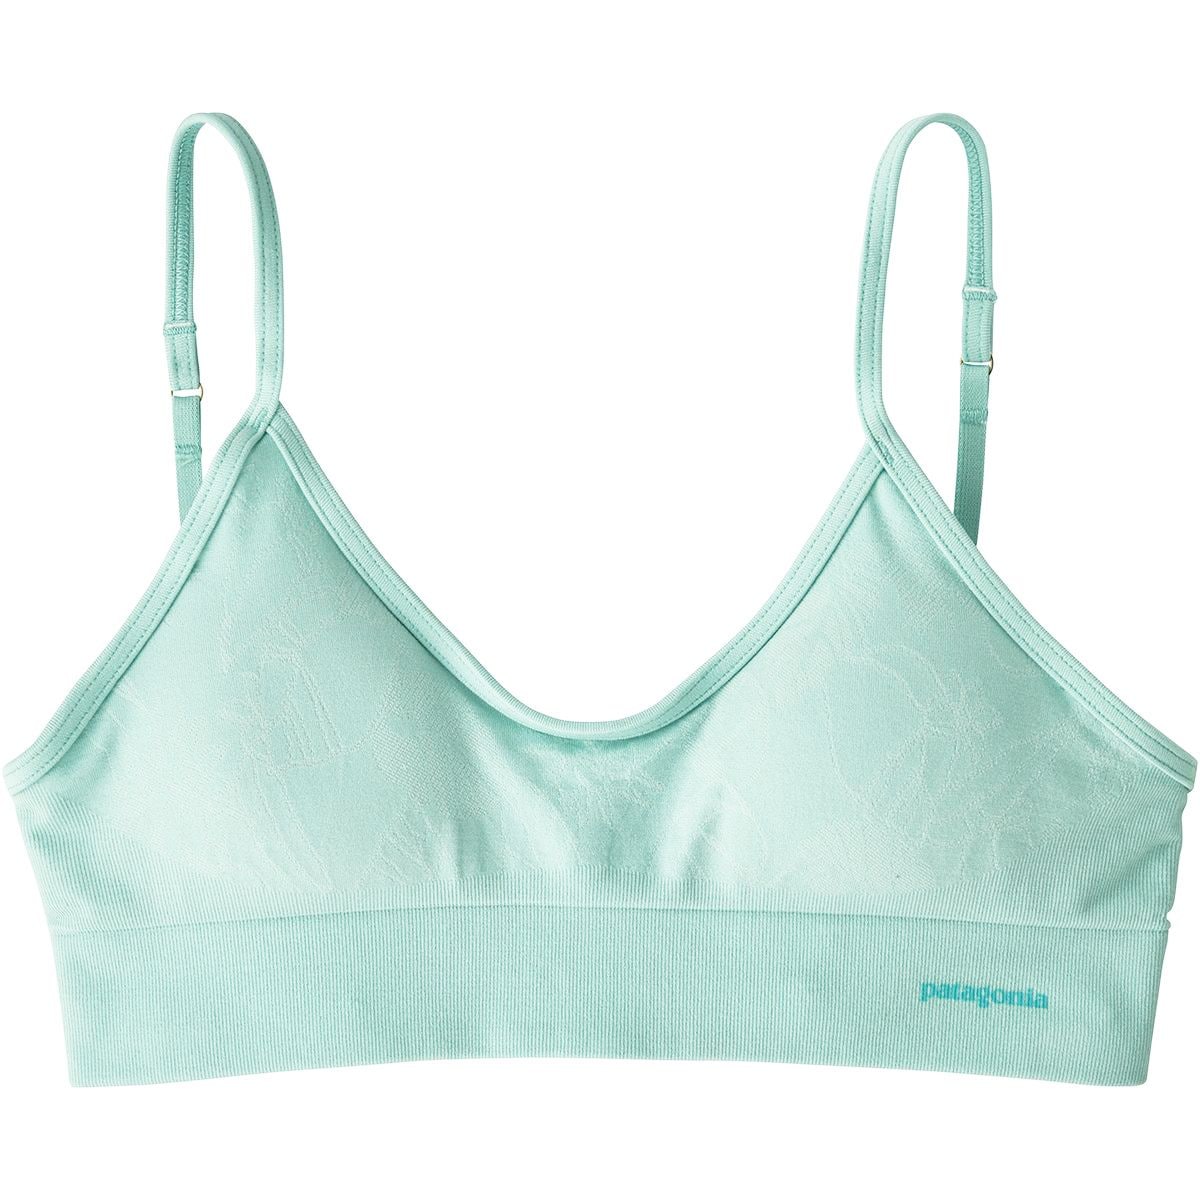 Patagonia Barely Everyday Bra, REI Co-op